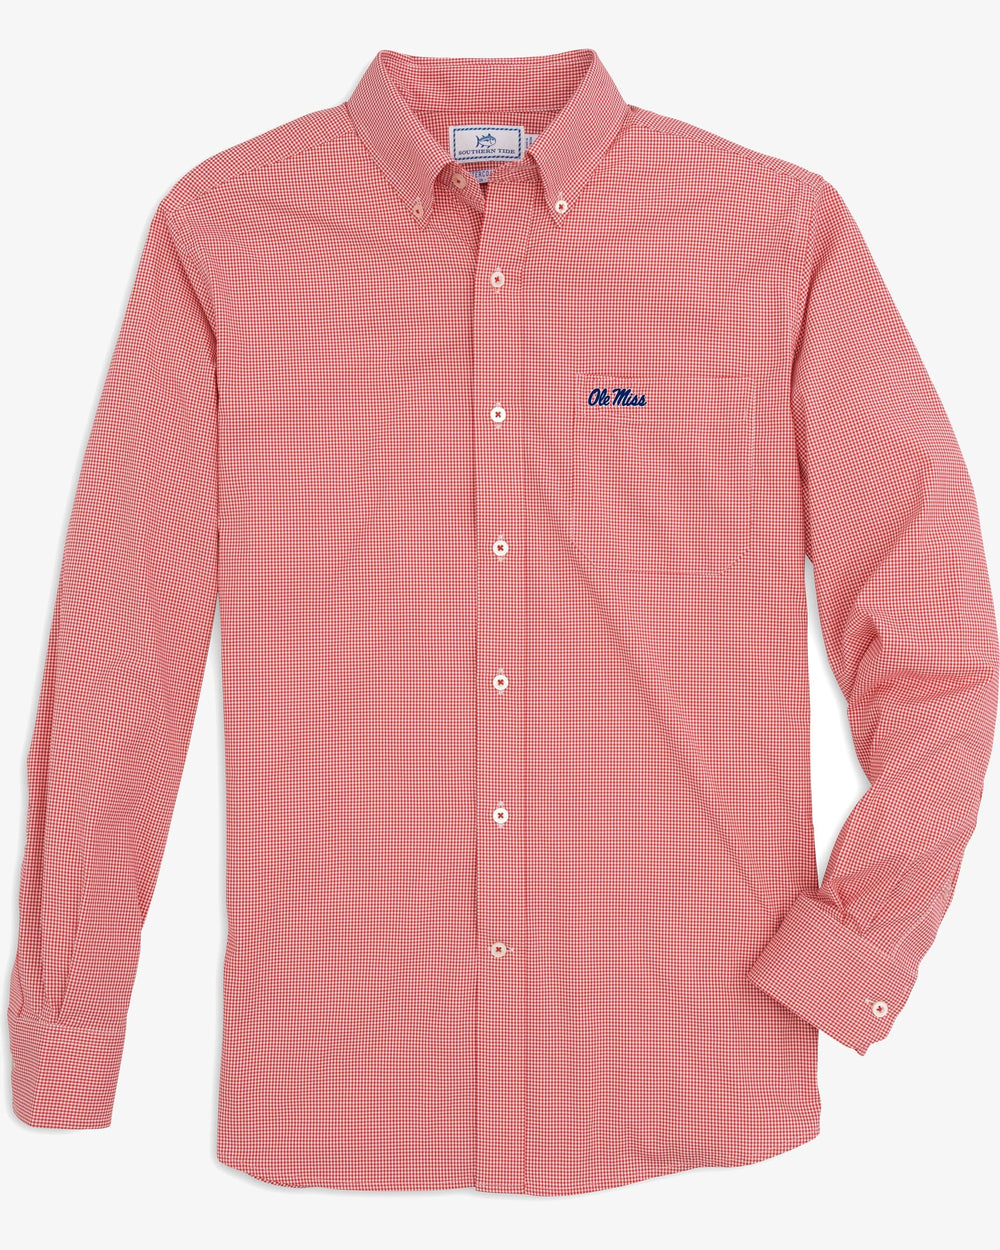 The front view of the Ole Miss Rebels Gingham Button Down Shirt by Southern Tide - Varsity Red